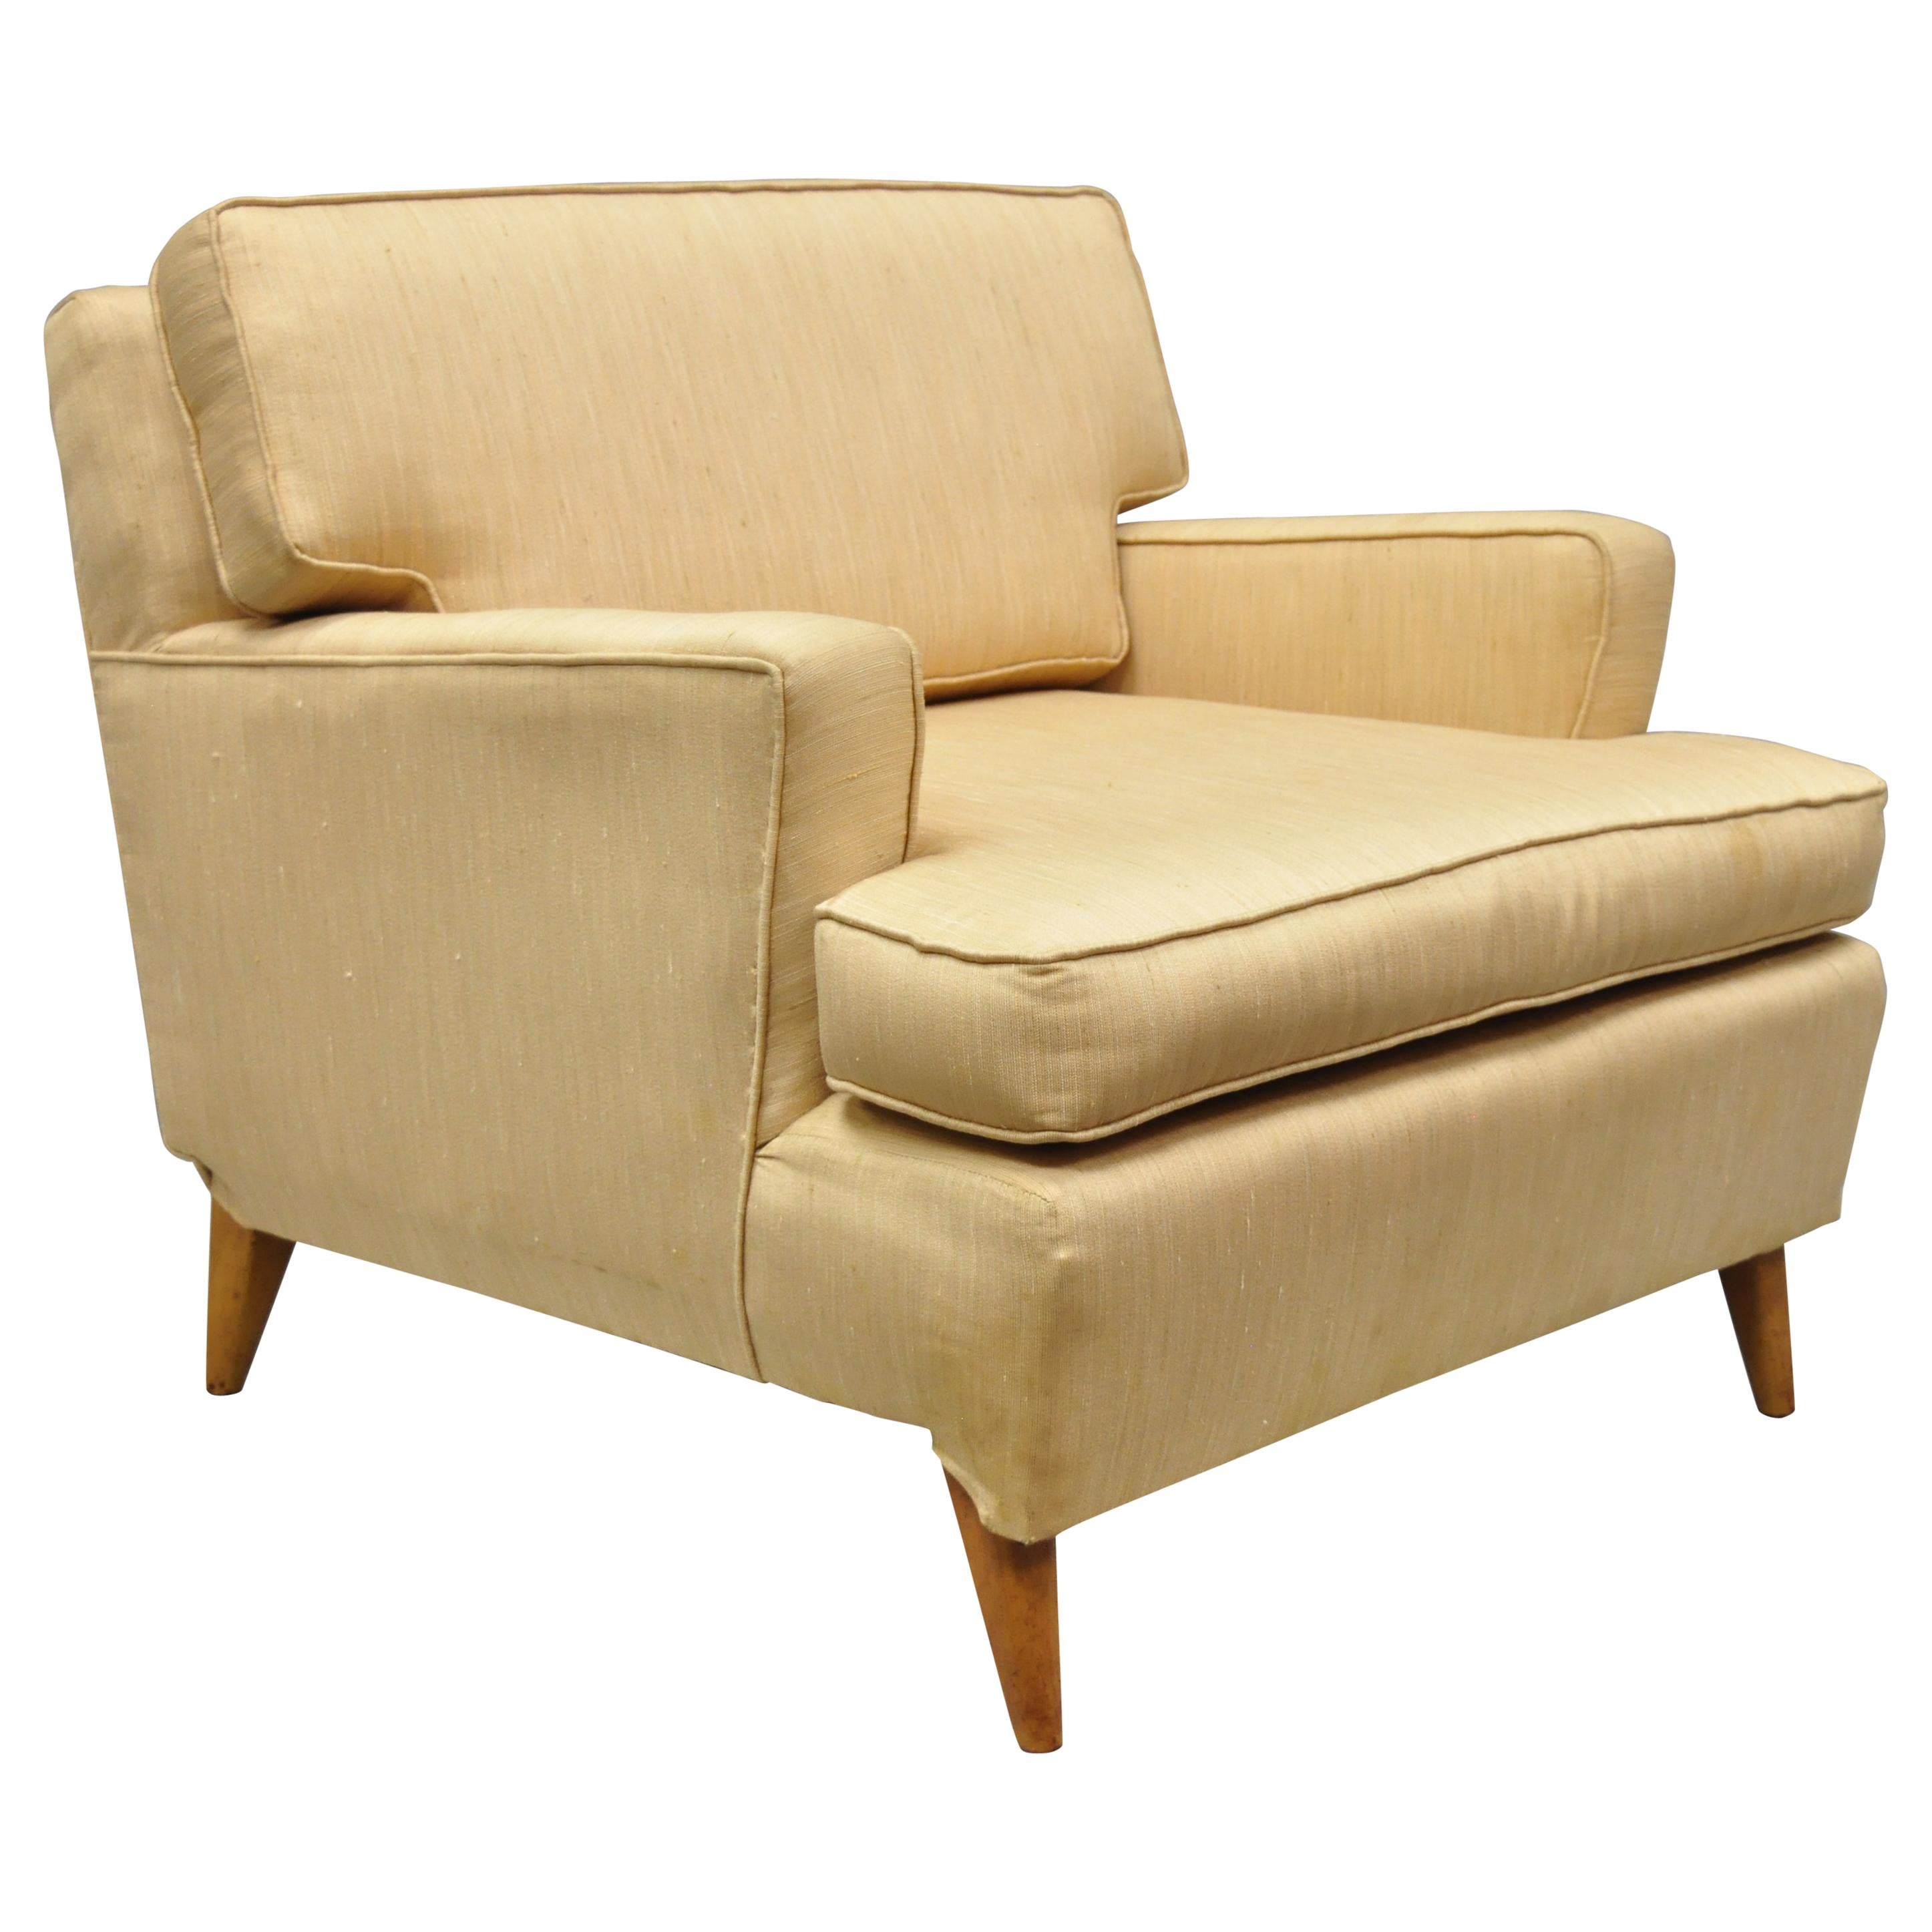 Mid-Century Modern Club Lounge Chair after Paul McCobb and Harvey Probber